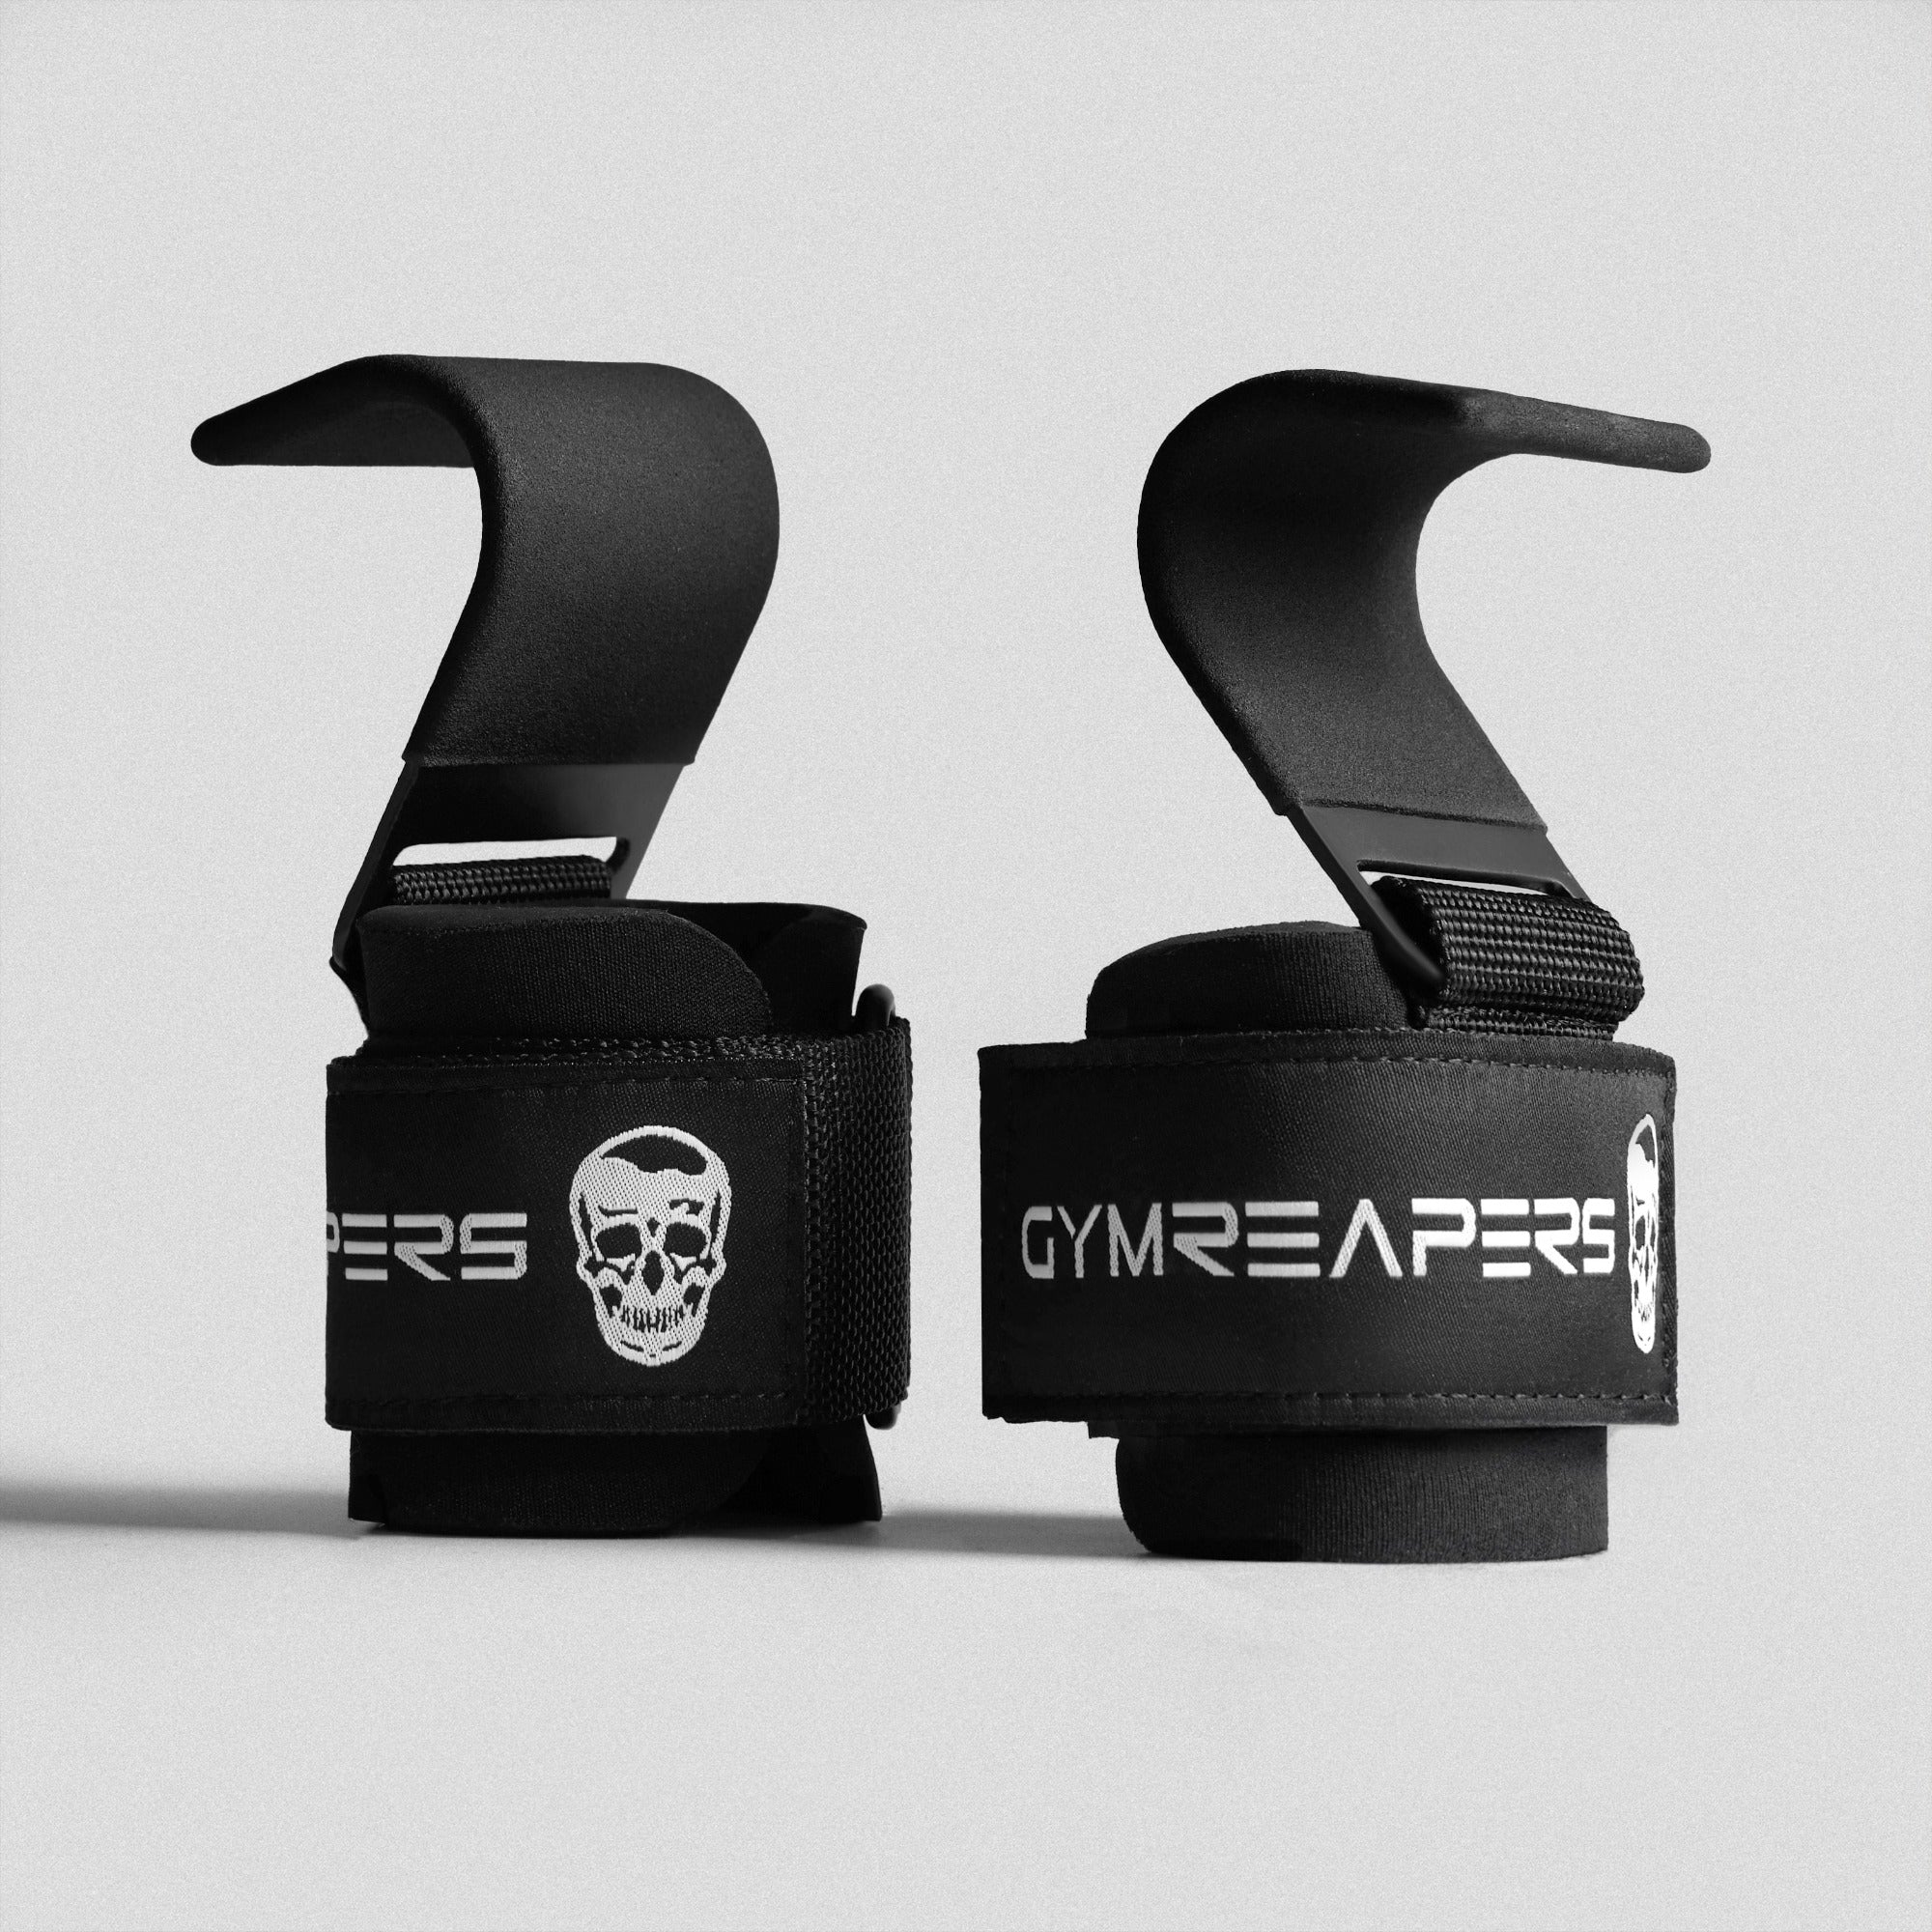 Gymreapers Weight Lifting Hooks Pair, Heavy Duty Power Wrist Straps Hand Grip Support for Deadlifts, Pull Ups, Shrugs - Gym Gloves for Men and Women